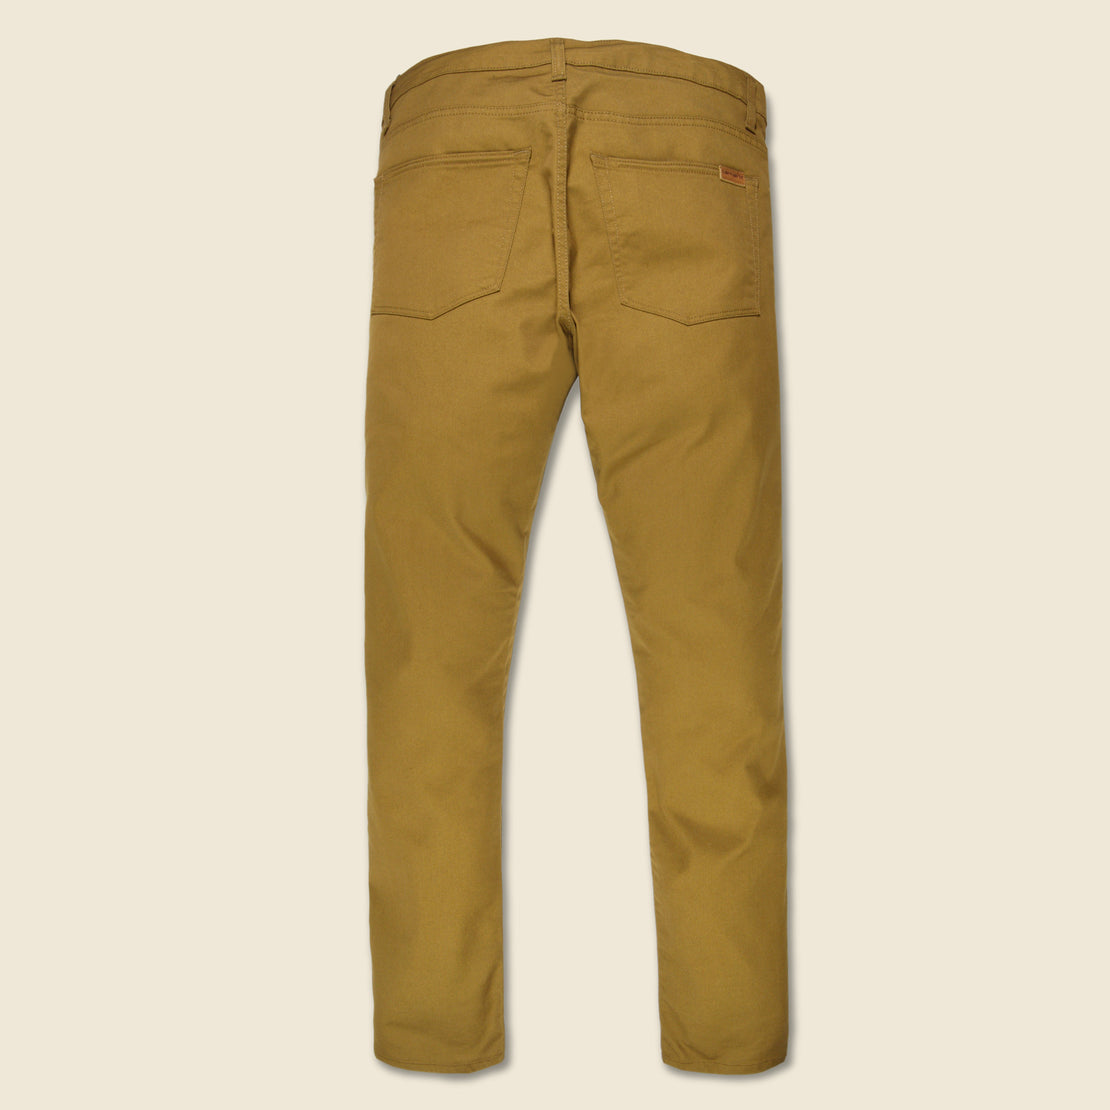 Vicious Pant - Hamilton Brown - Carhartt WIP - STAG Provisions - Pants - Twill